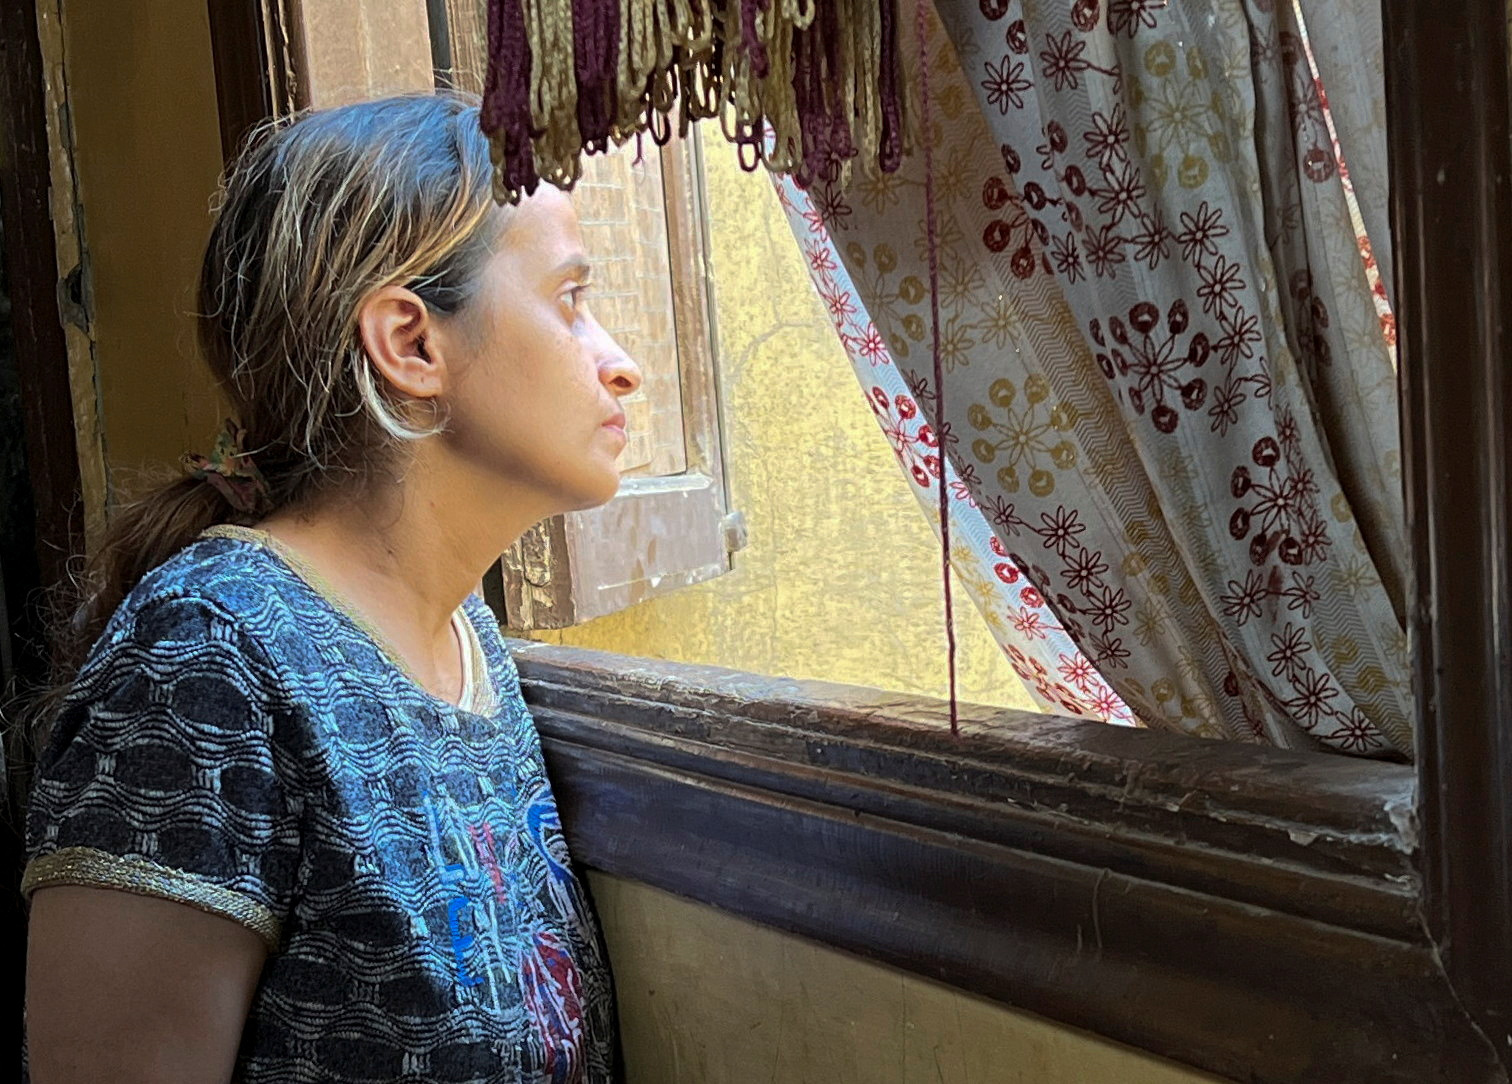 Mary Magdy, a Coptic Christian woman, looks out of a window, in Cairo